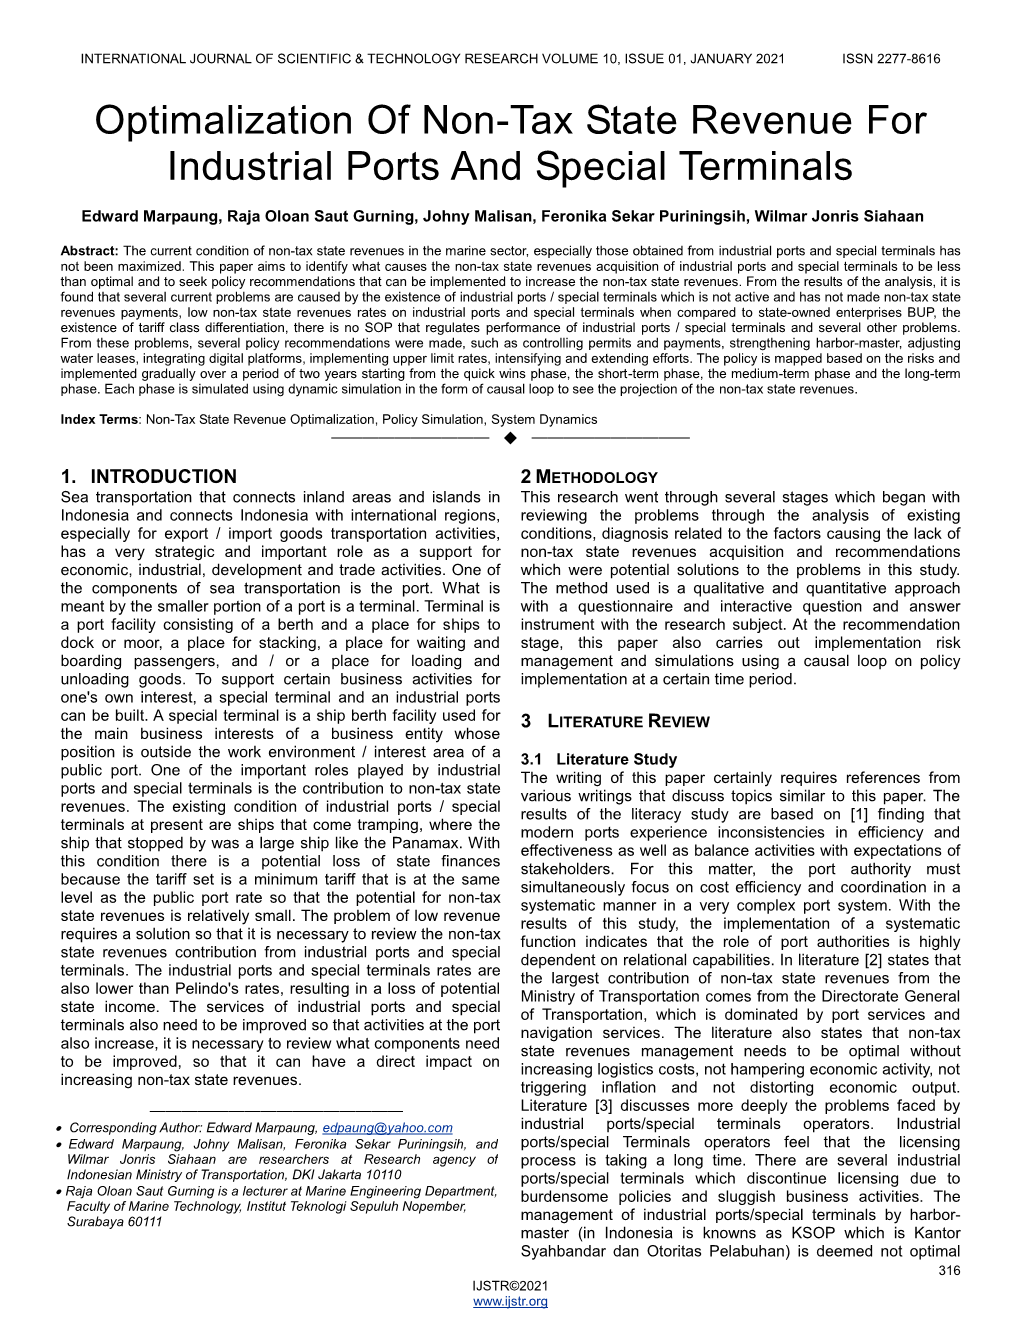 Optimalization of Non-Tax State Revenue for Industrial Ports and Special Terminals